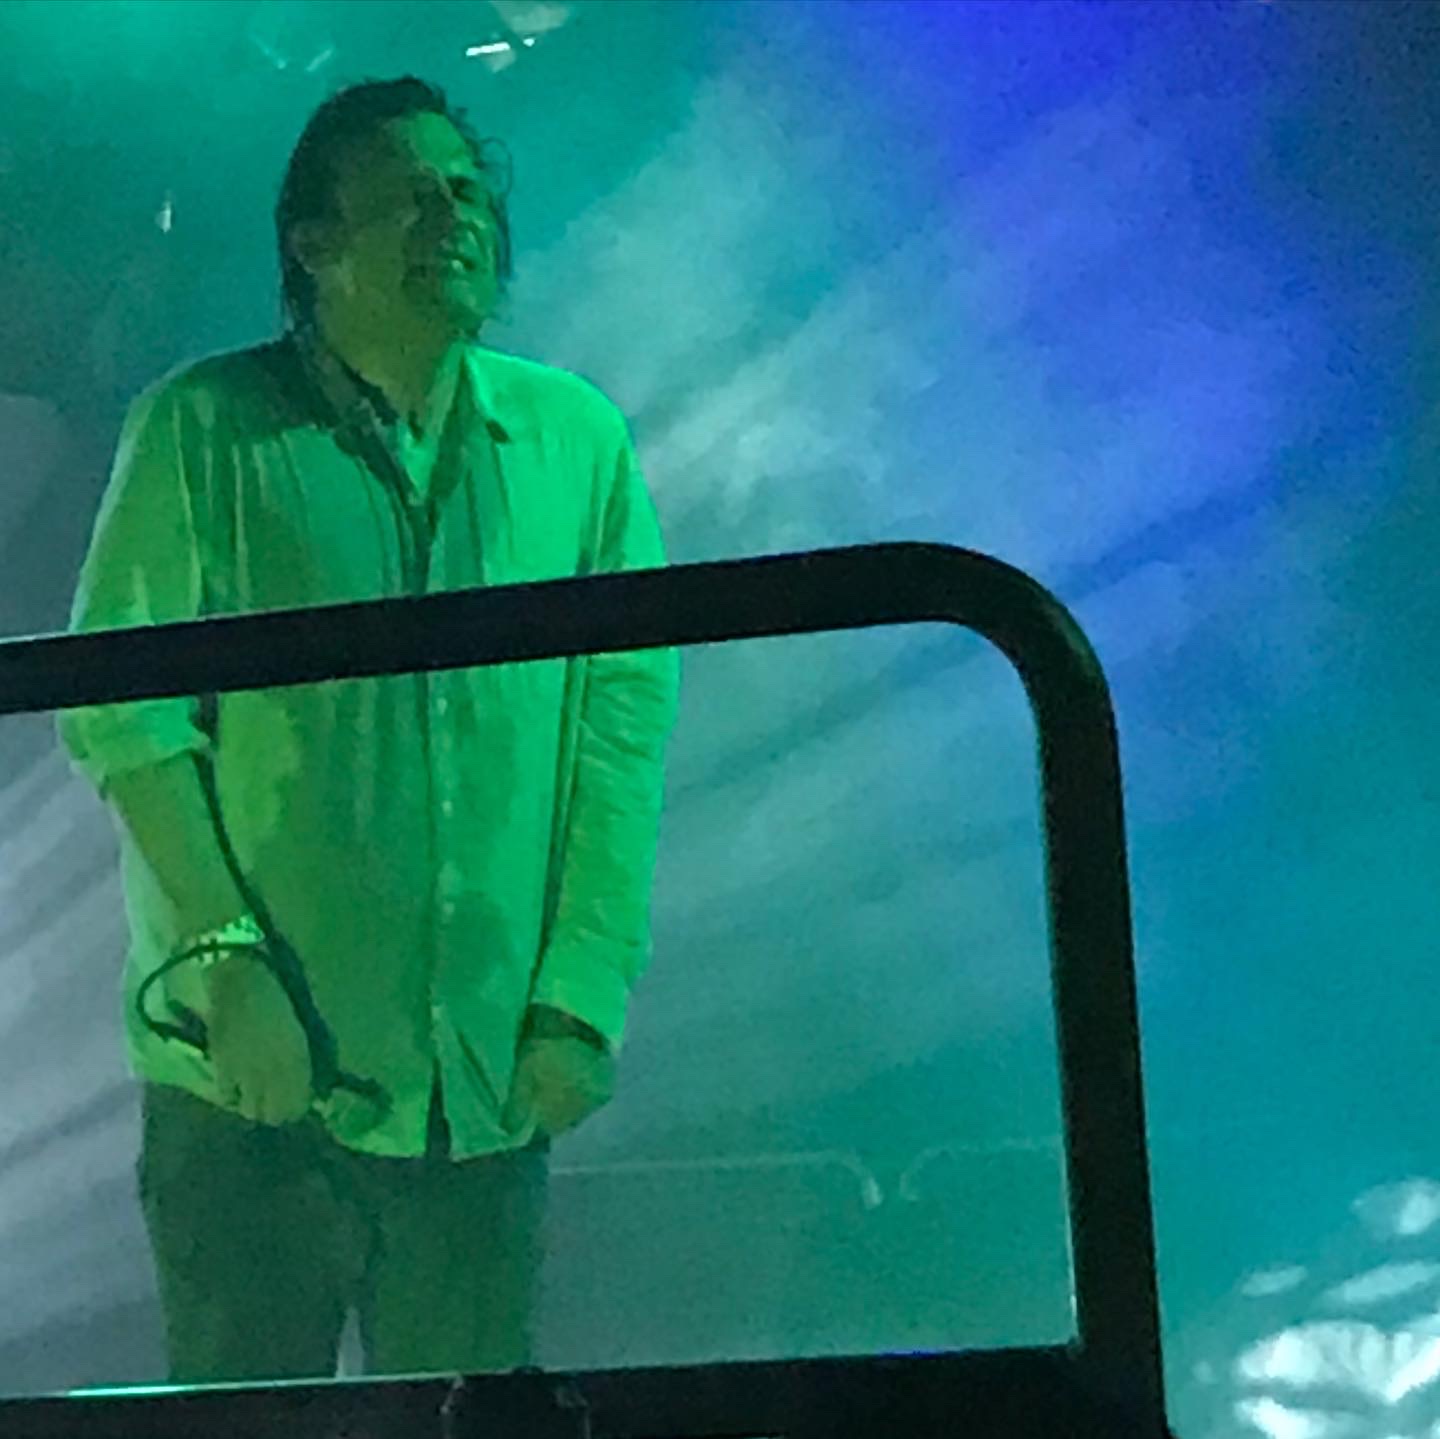 John Maus at the Knockdown Center, Queens NYC